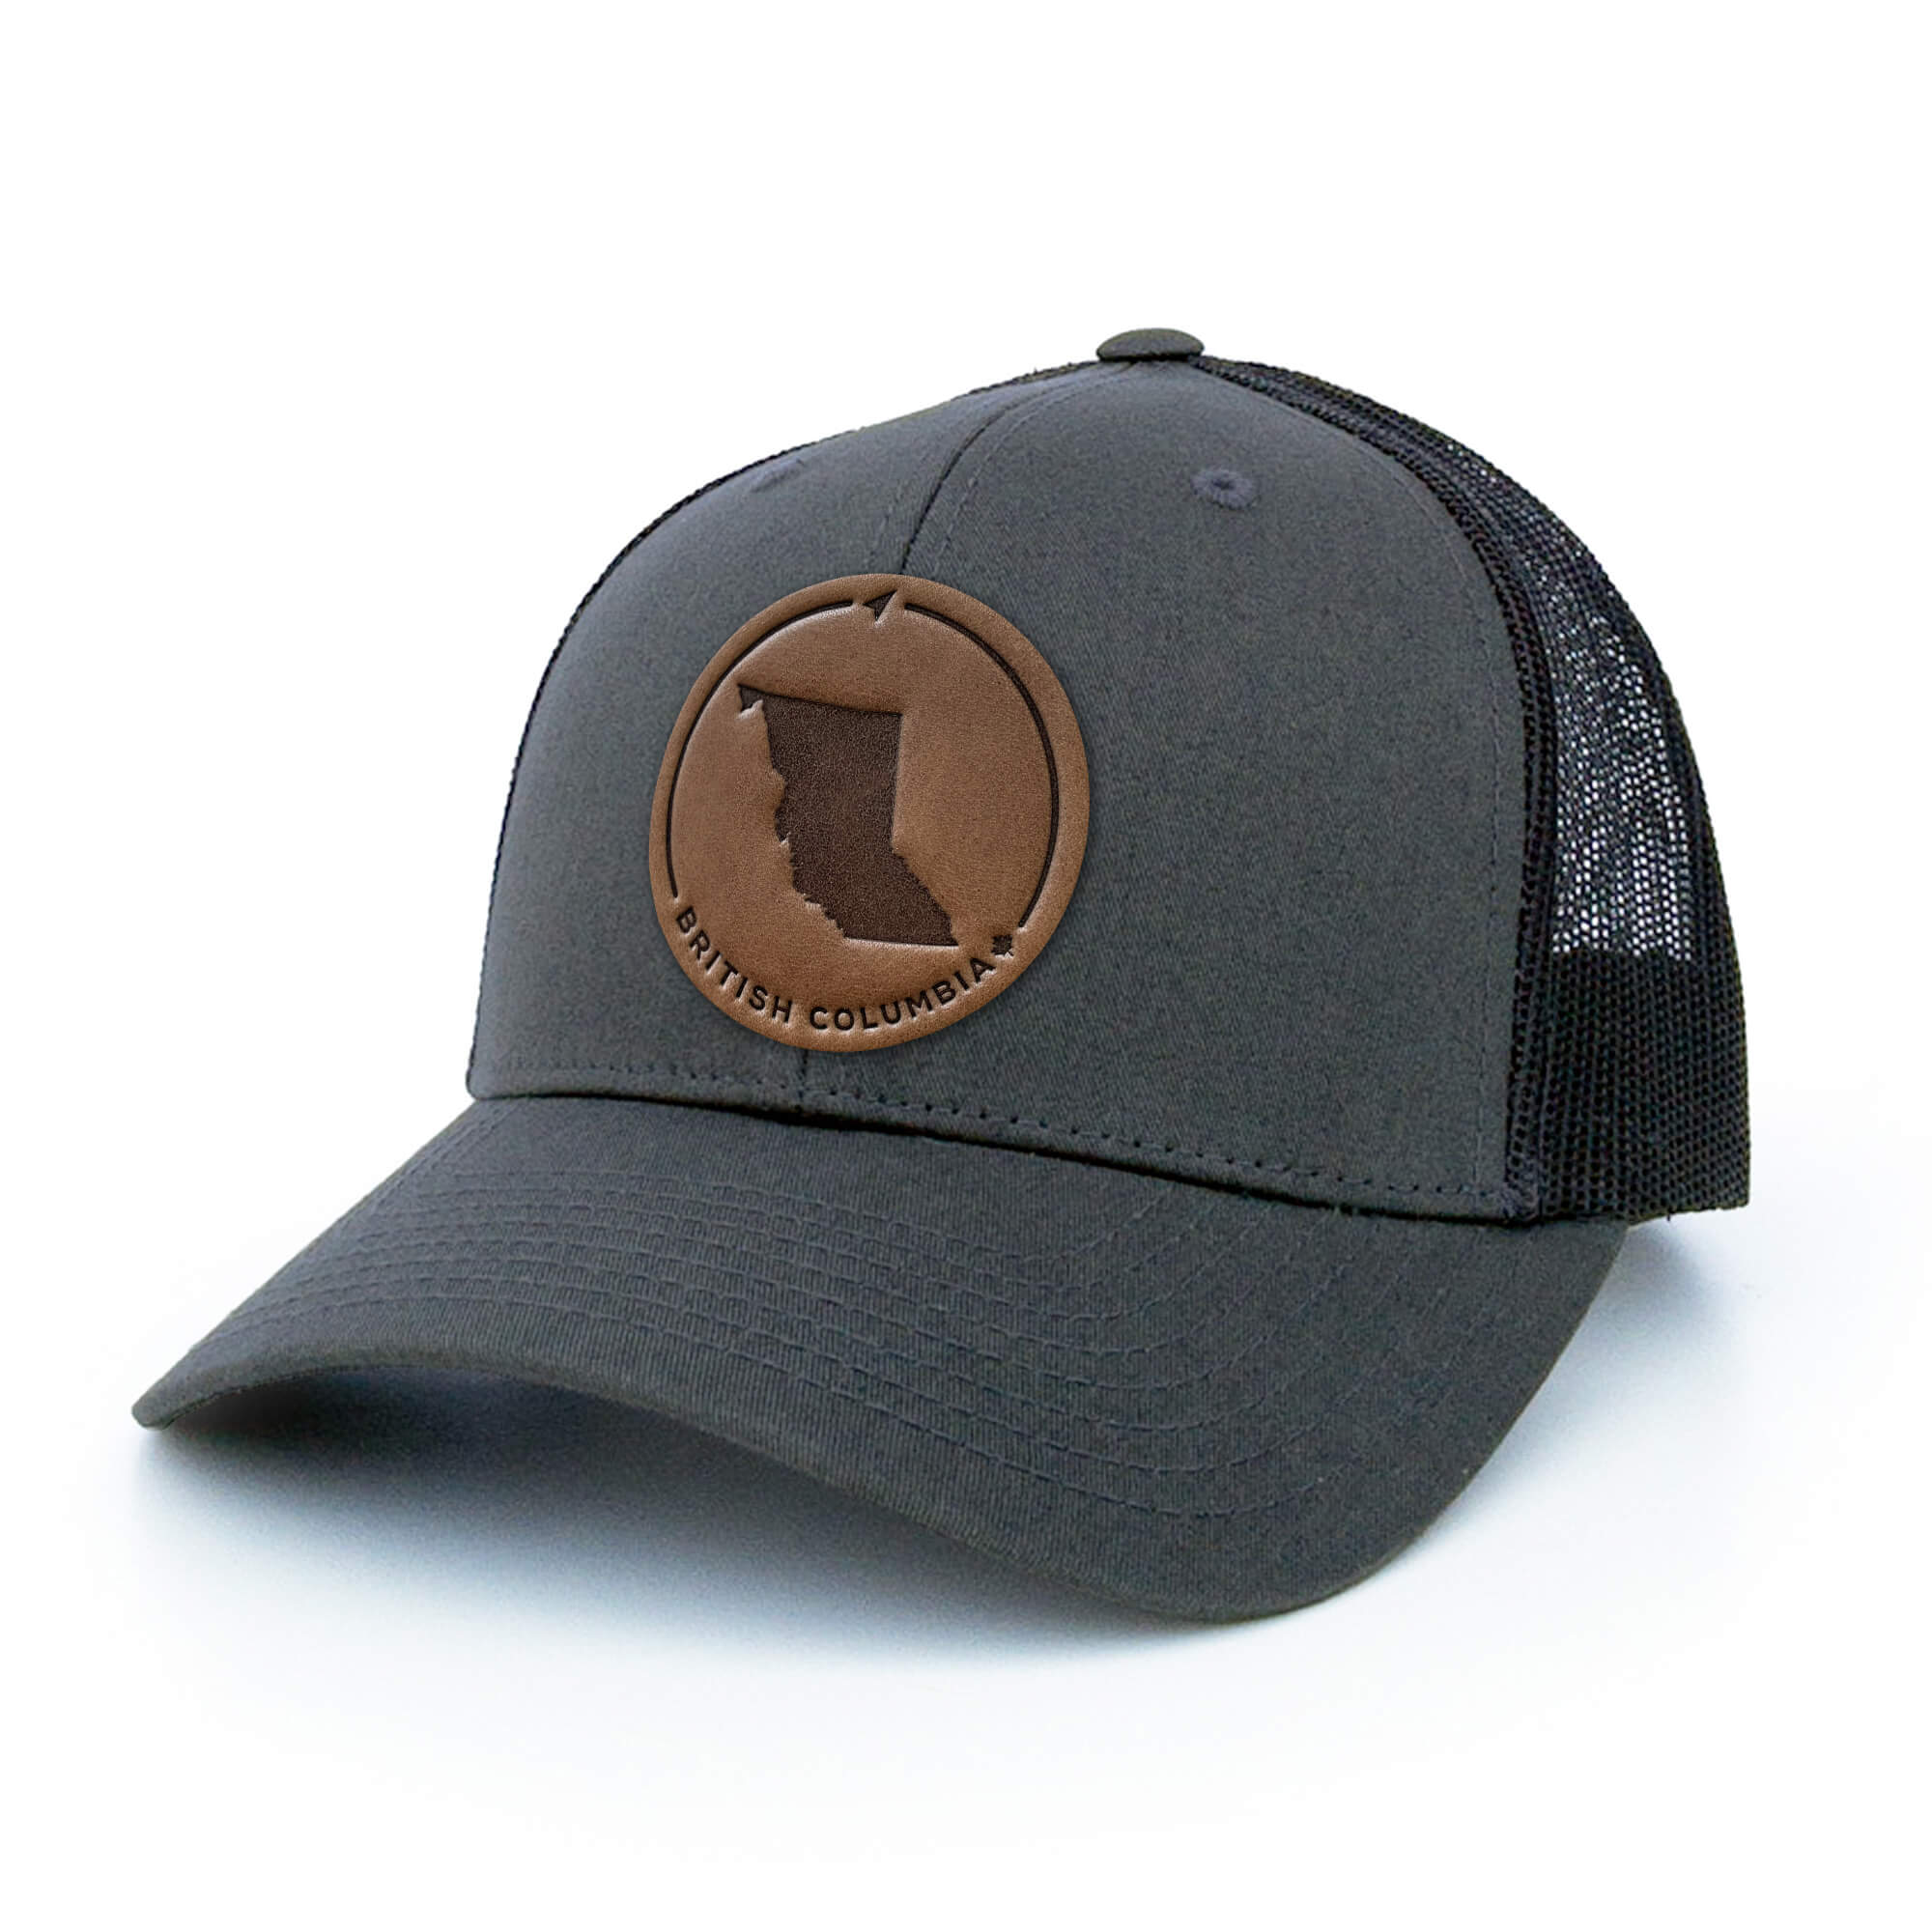 Charcoal trucker hat with full-grain leather patch of British Columbia | BLACK-002-004, CHARC-002-004, NAVY-002-004, HGREY-002-004, MOSS-002-004, BROWN-002-004